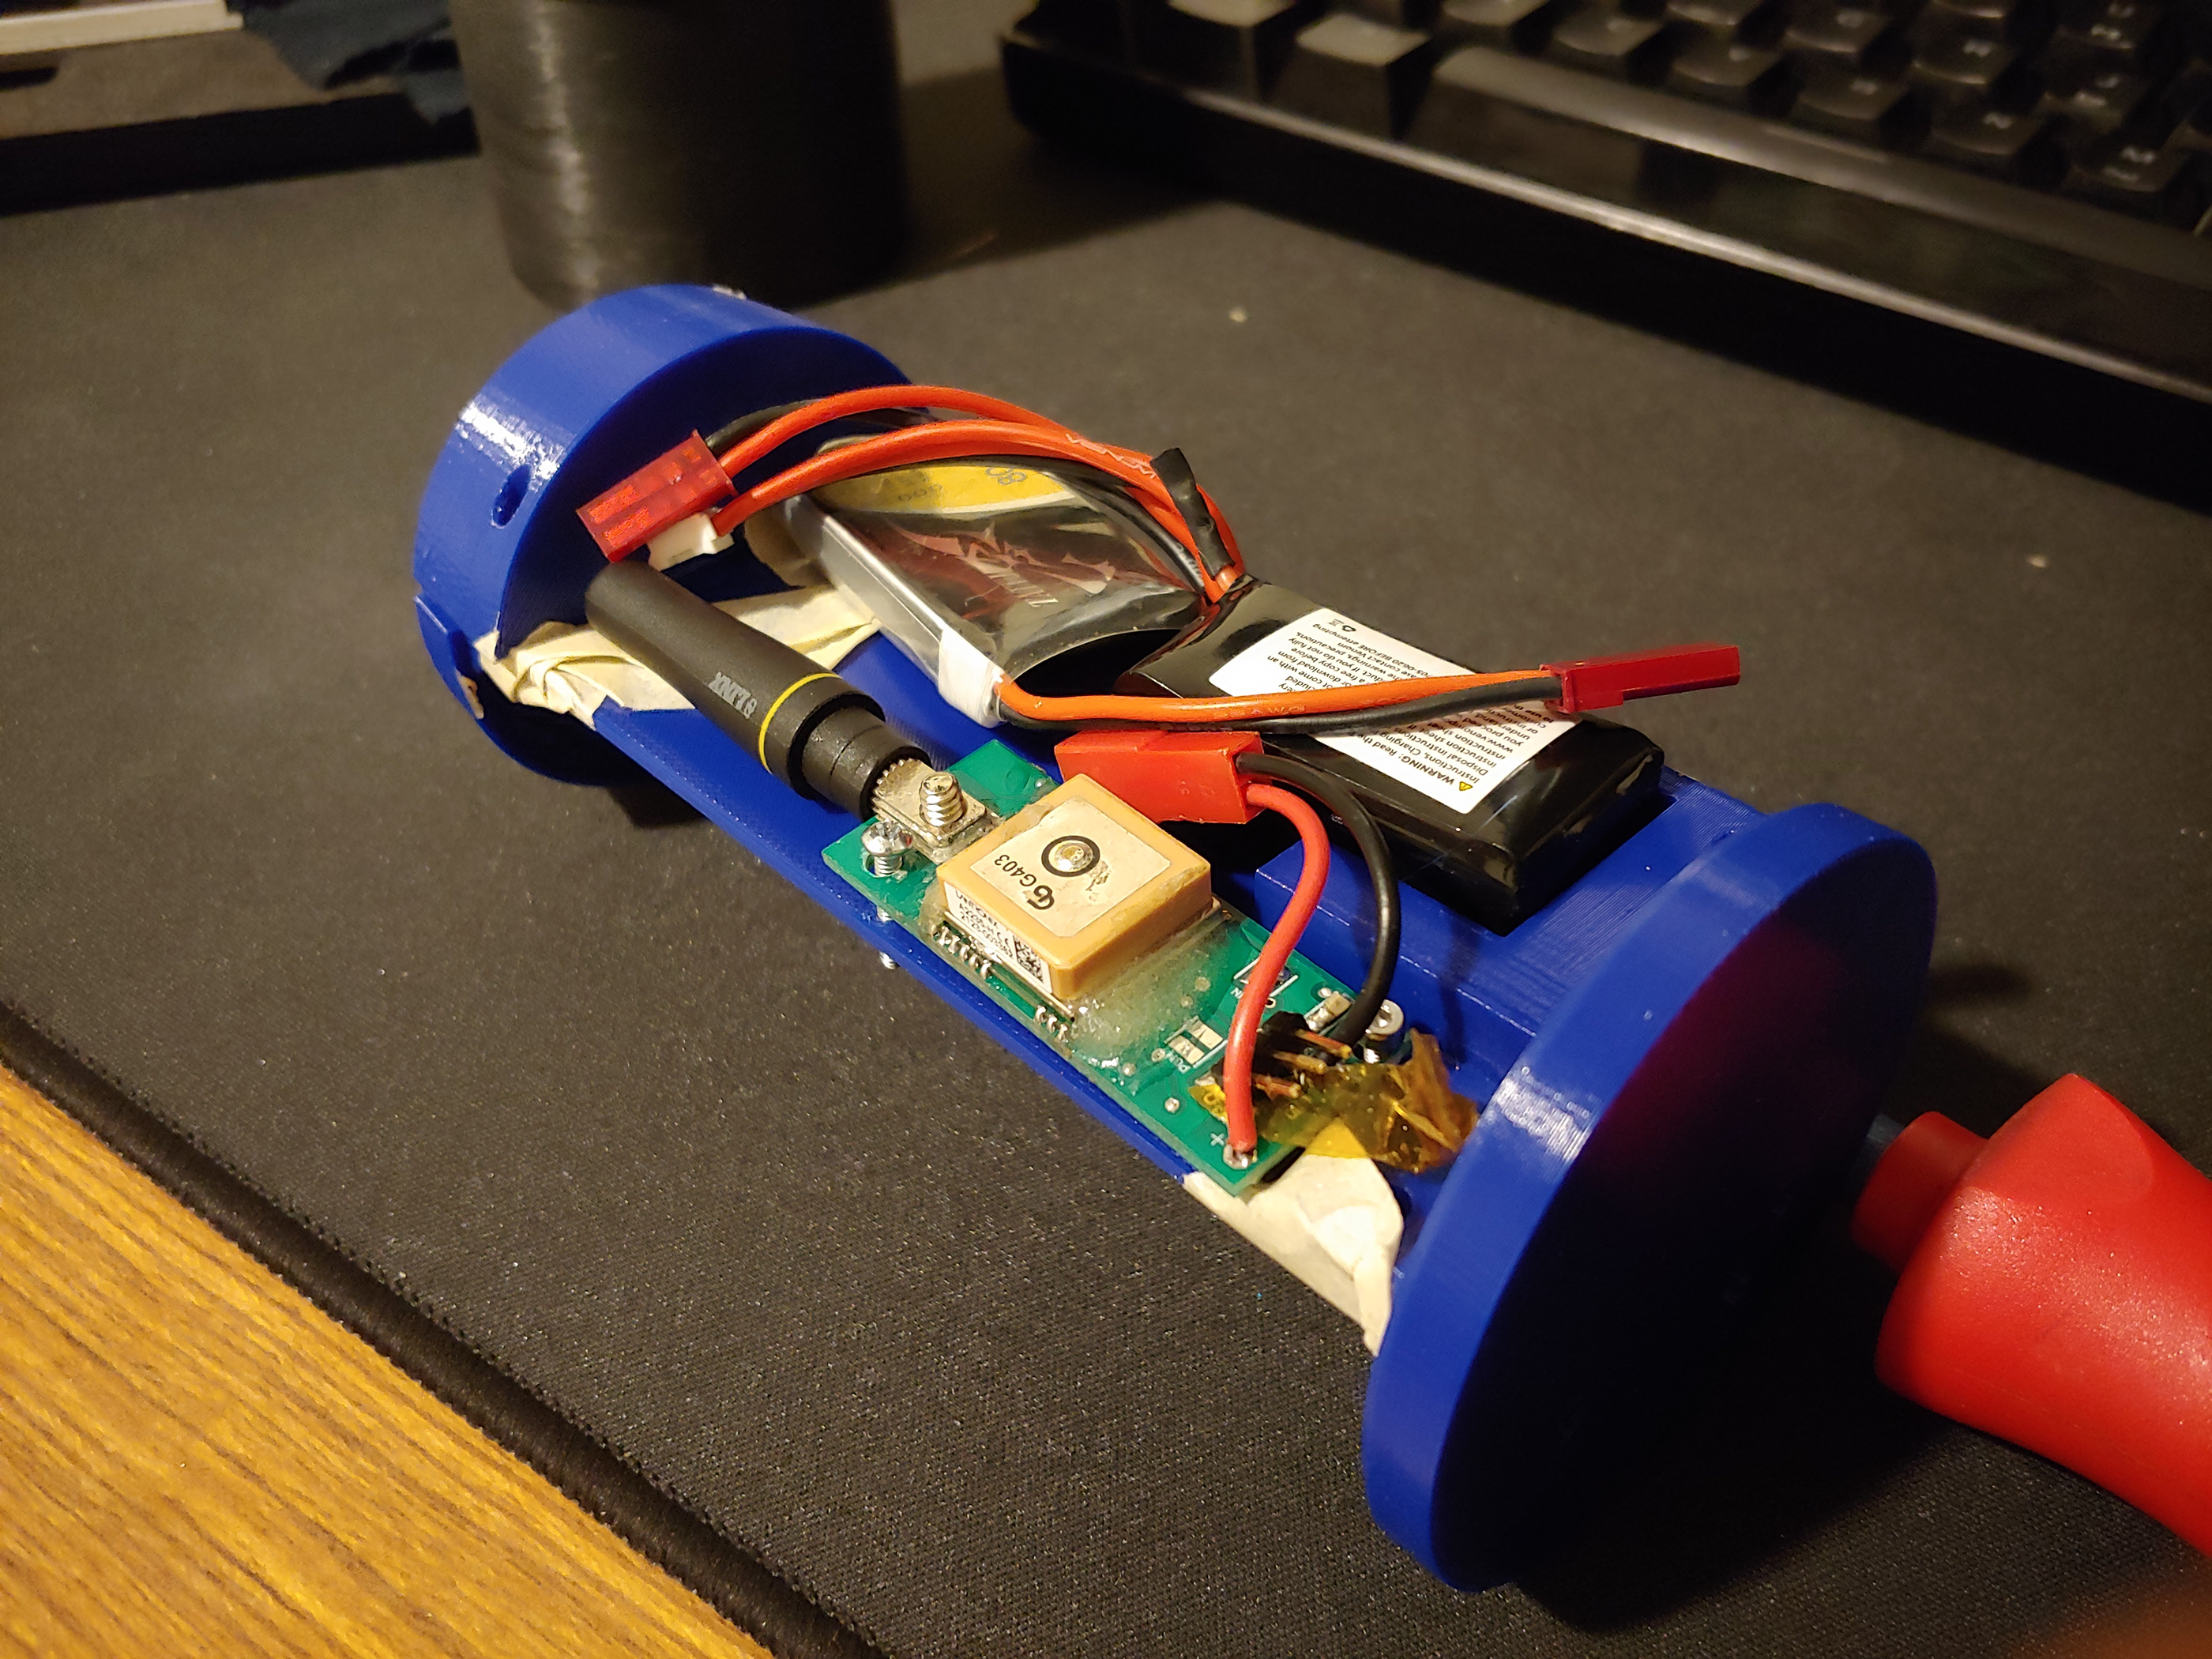 Assembled nosecone sled